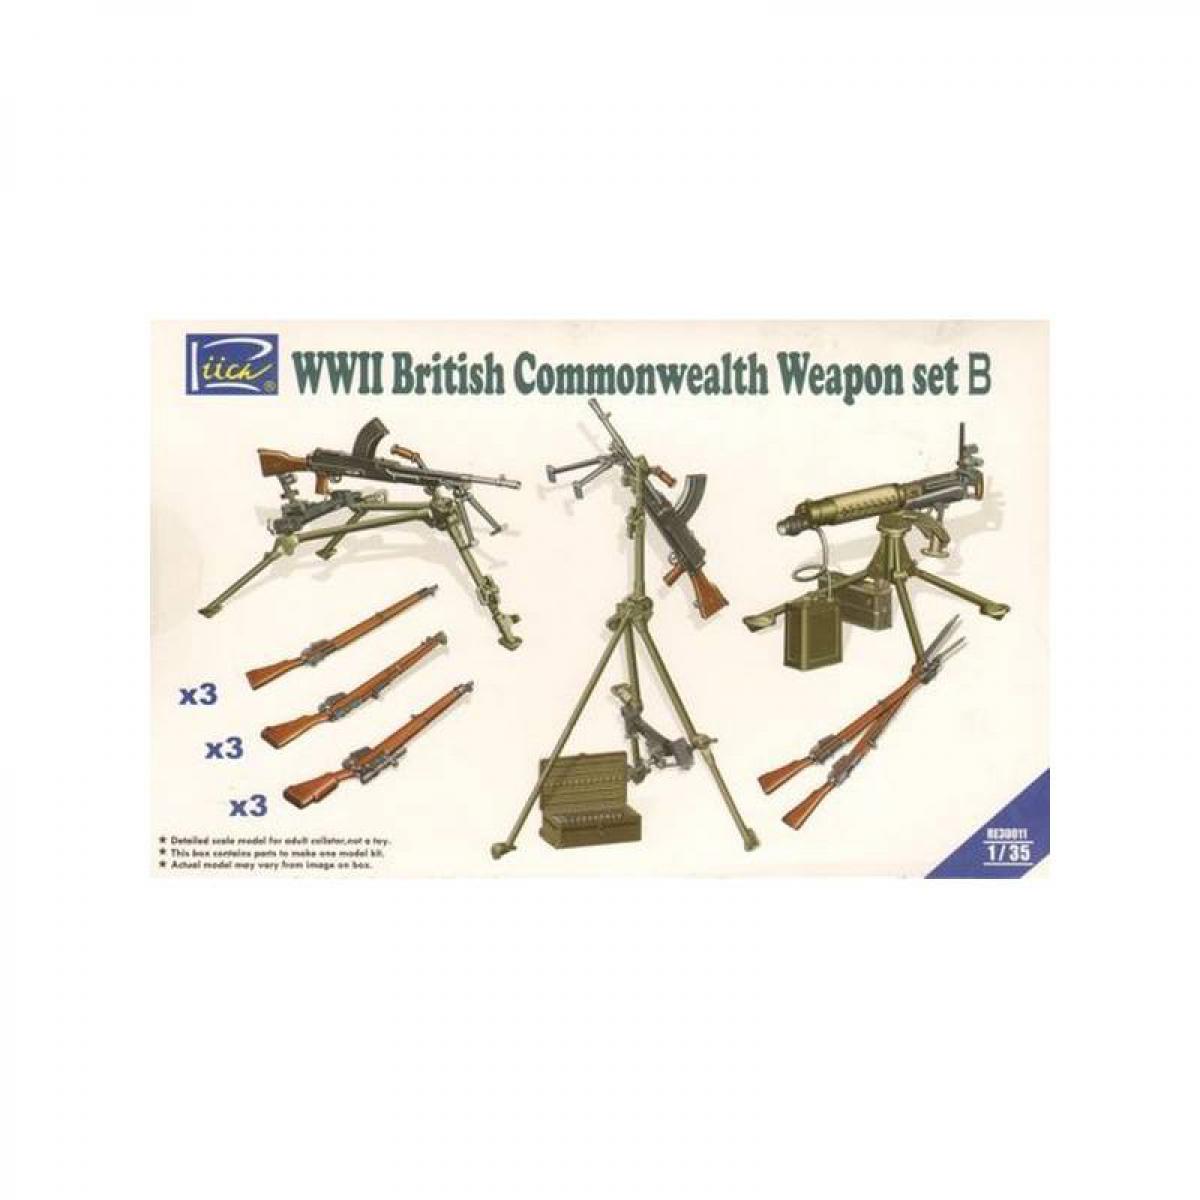 Riich Models - Figurine Mignature Maquette Wwii British Commonwealth Weapon Set B - Figurines militaires